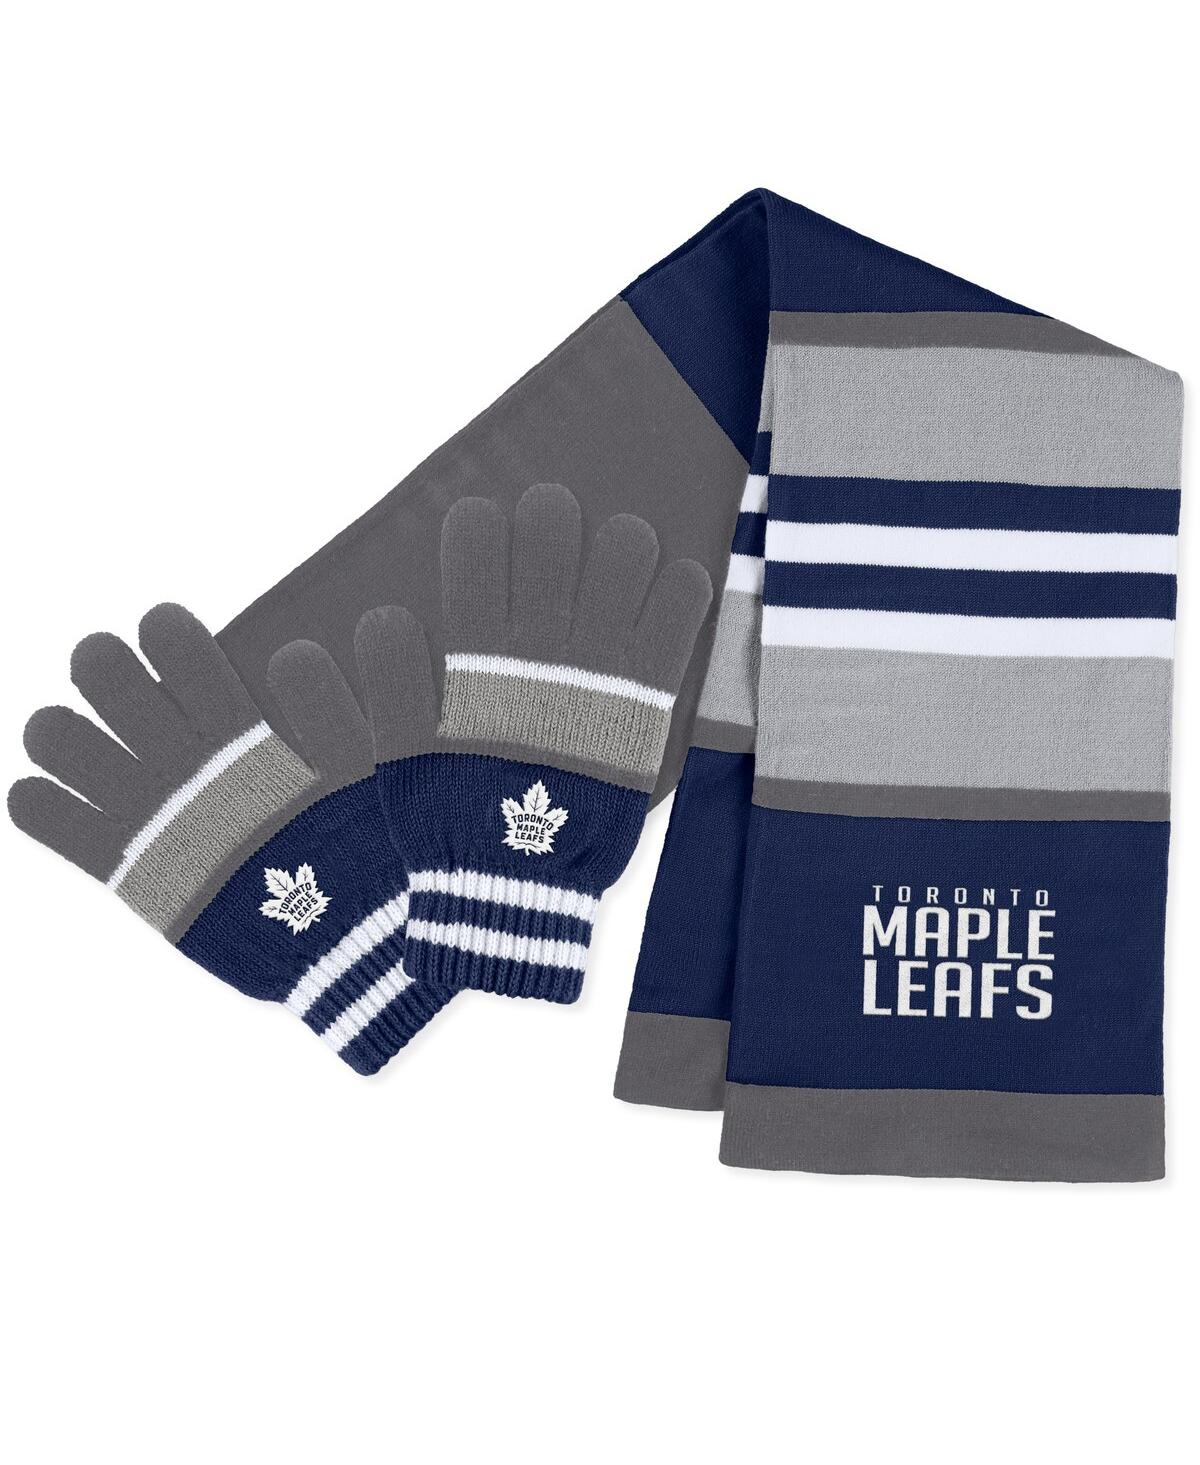 Wear By Erin Andrews Women's  Toronto Maple Leafs Stripe Glove And Scarf Set In Gray,navy